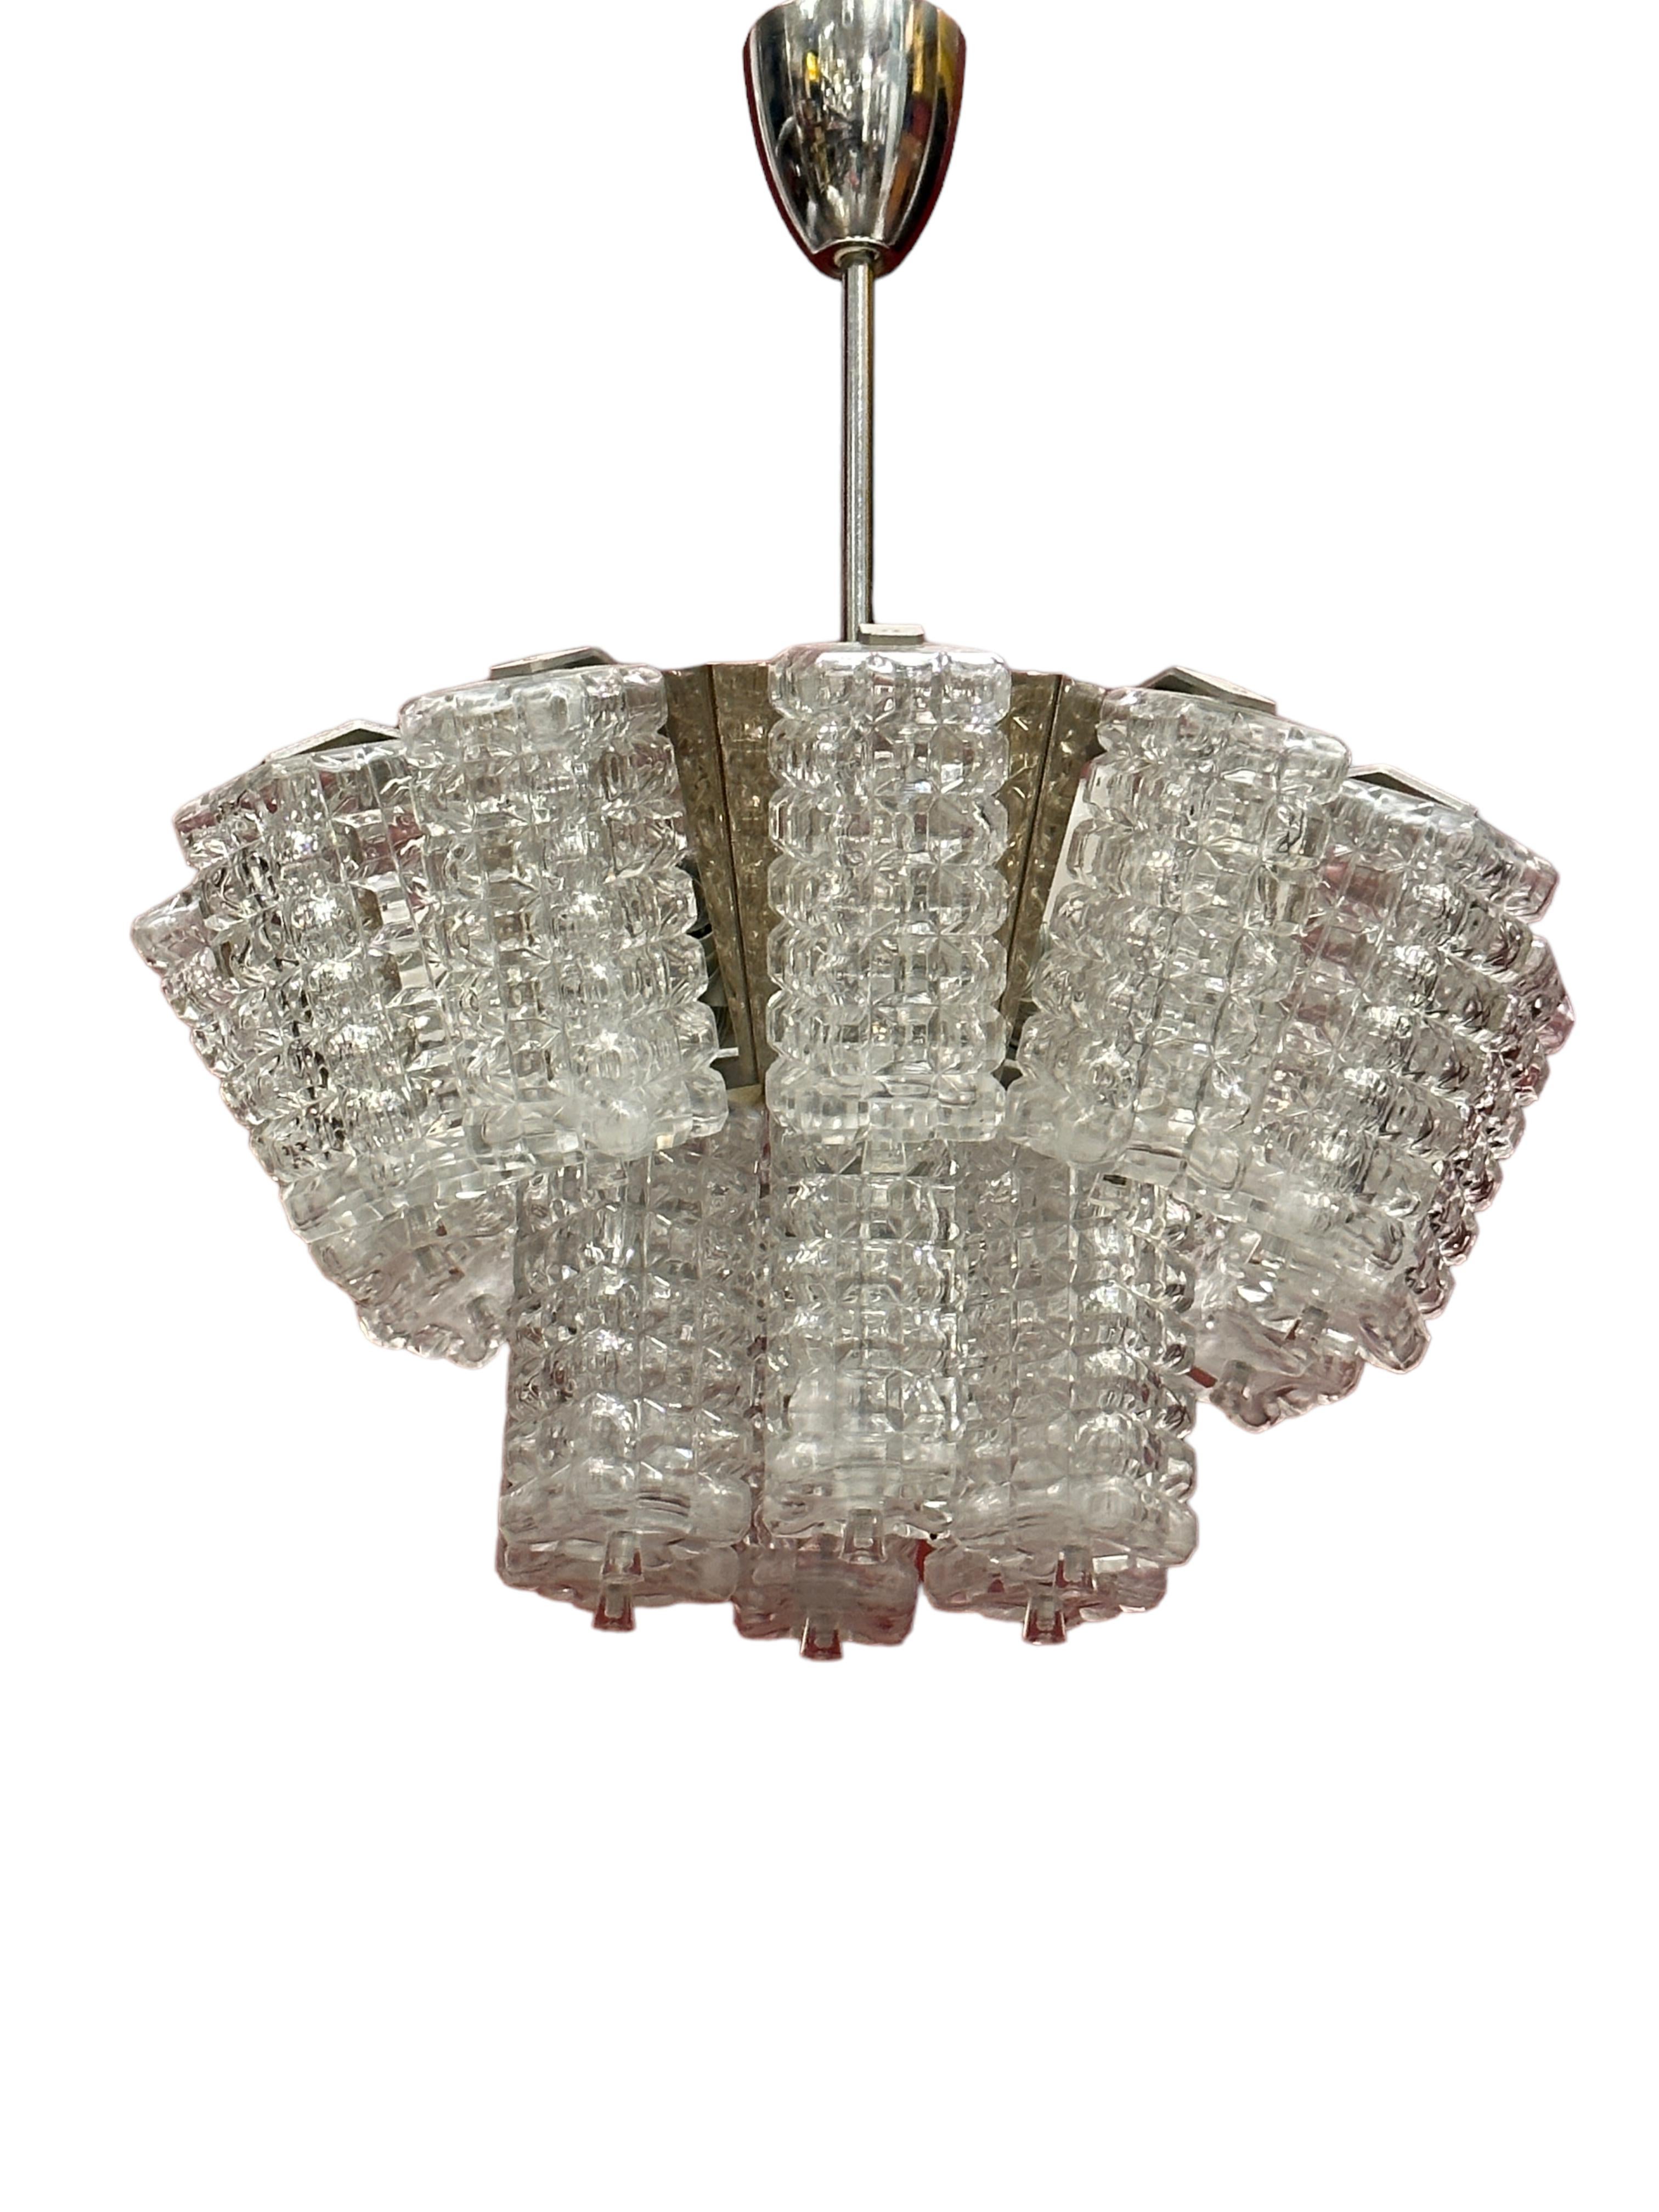 Pair of Two Tiered Glass Cube Chandelier by Austrolux, Austria, 1960s For Sale 4